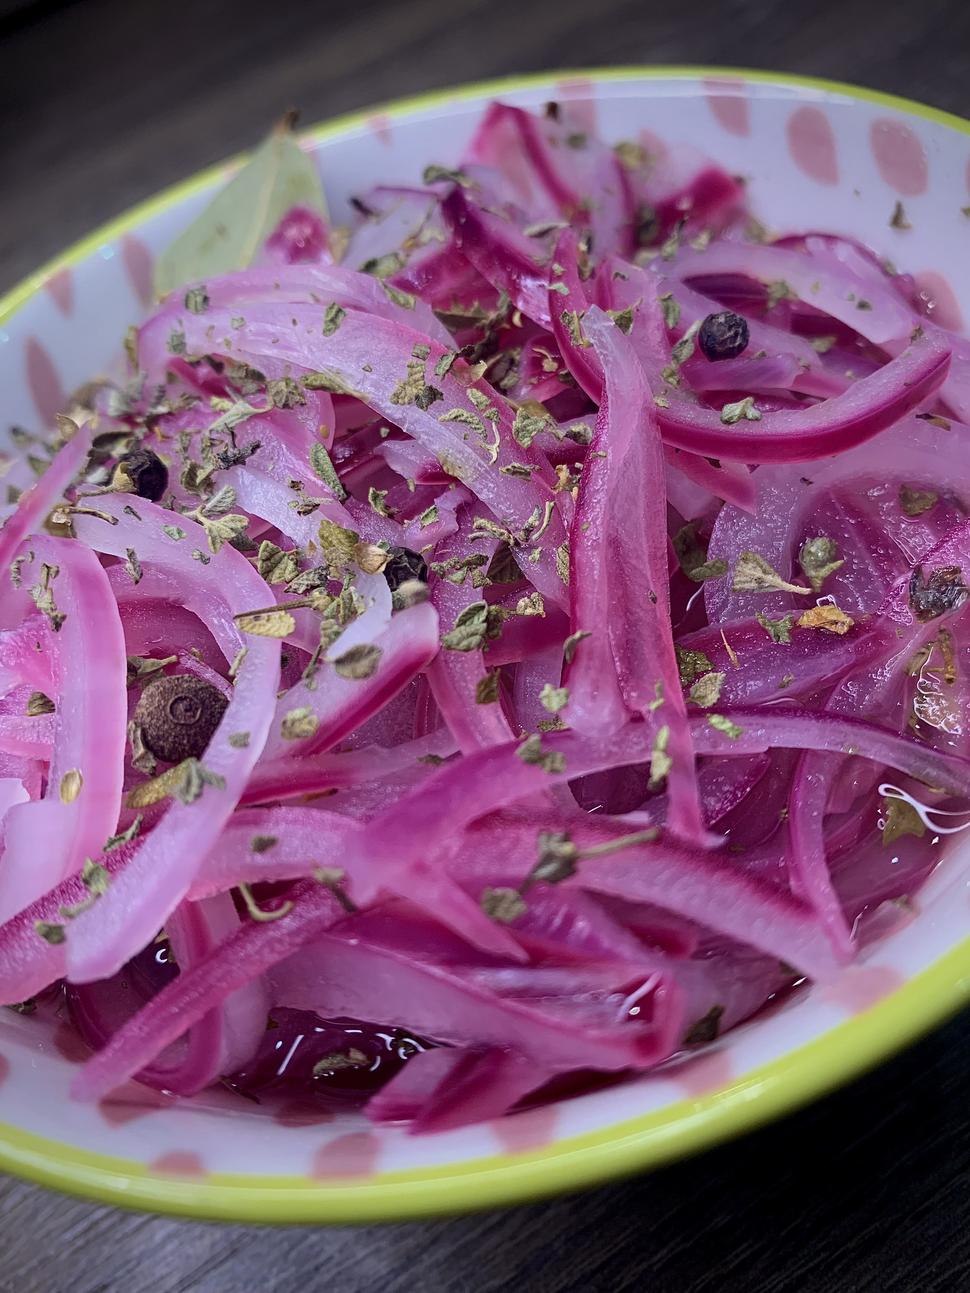 Pickled red onions go well with any grilled meat.